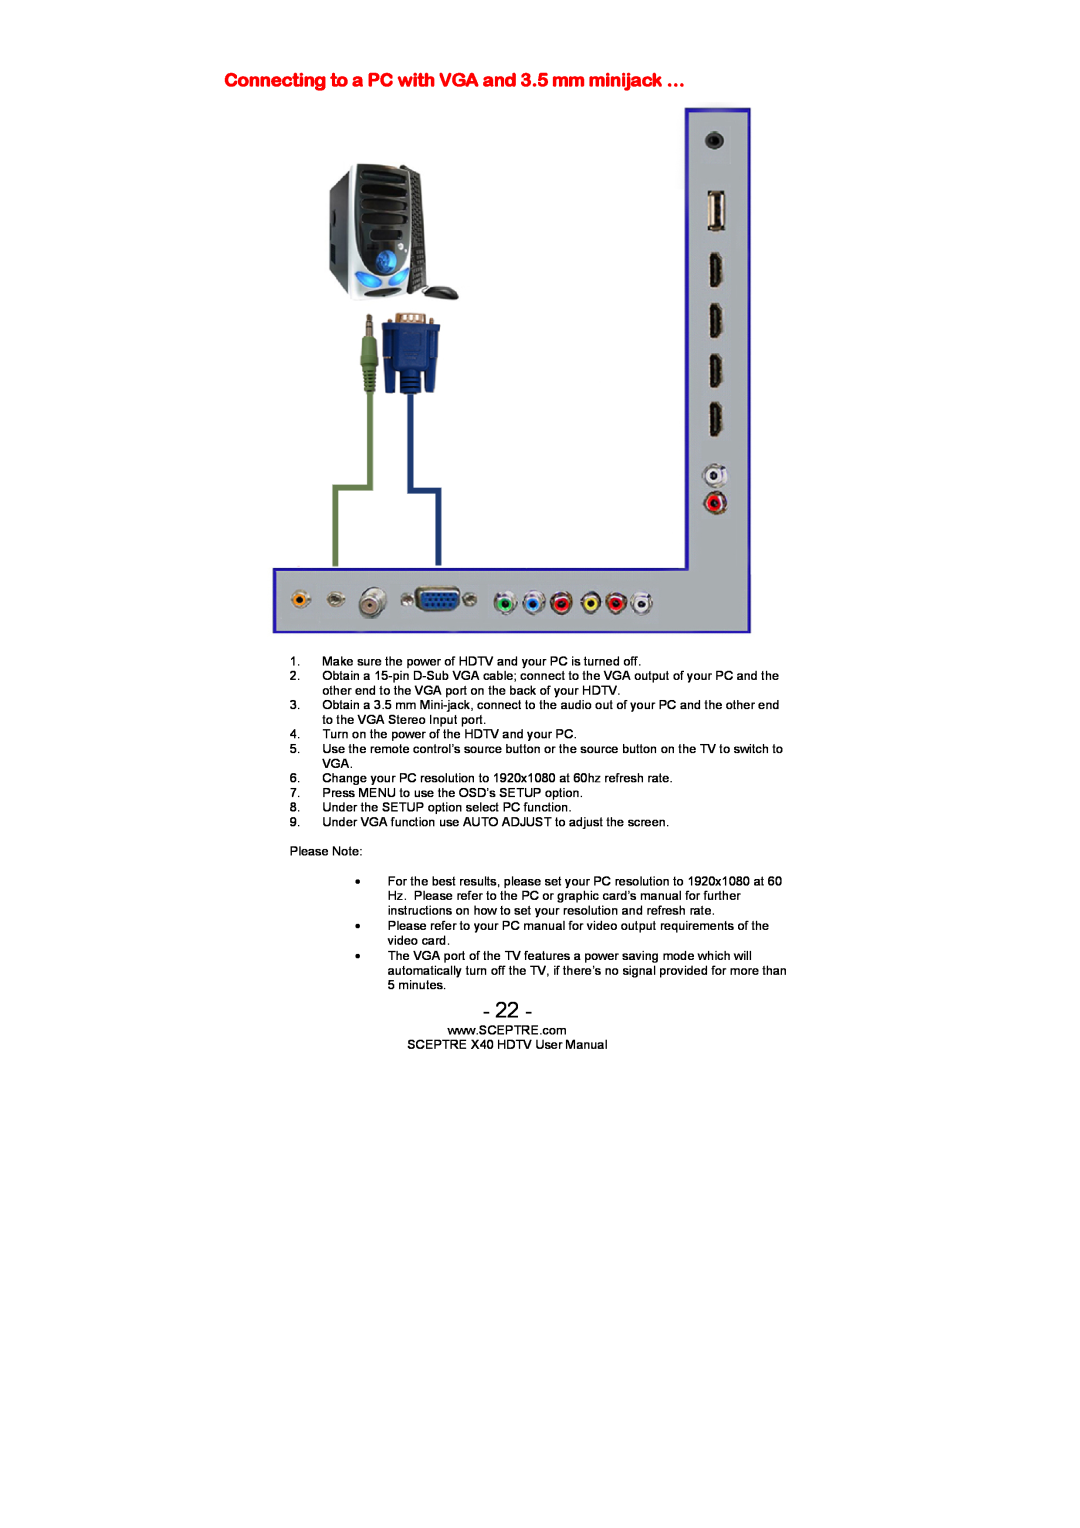 Sceptre Technologies SCEPTRE X40 HDTV user manual Connecting to a PC with VGA and 3.5 mm minijack … 